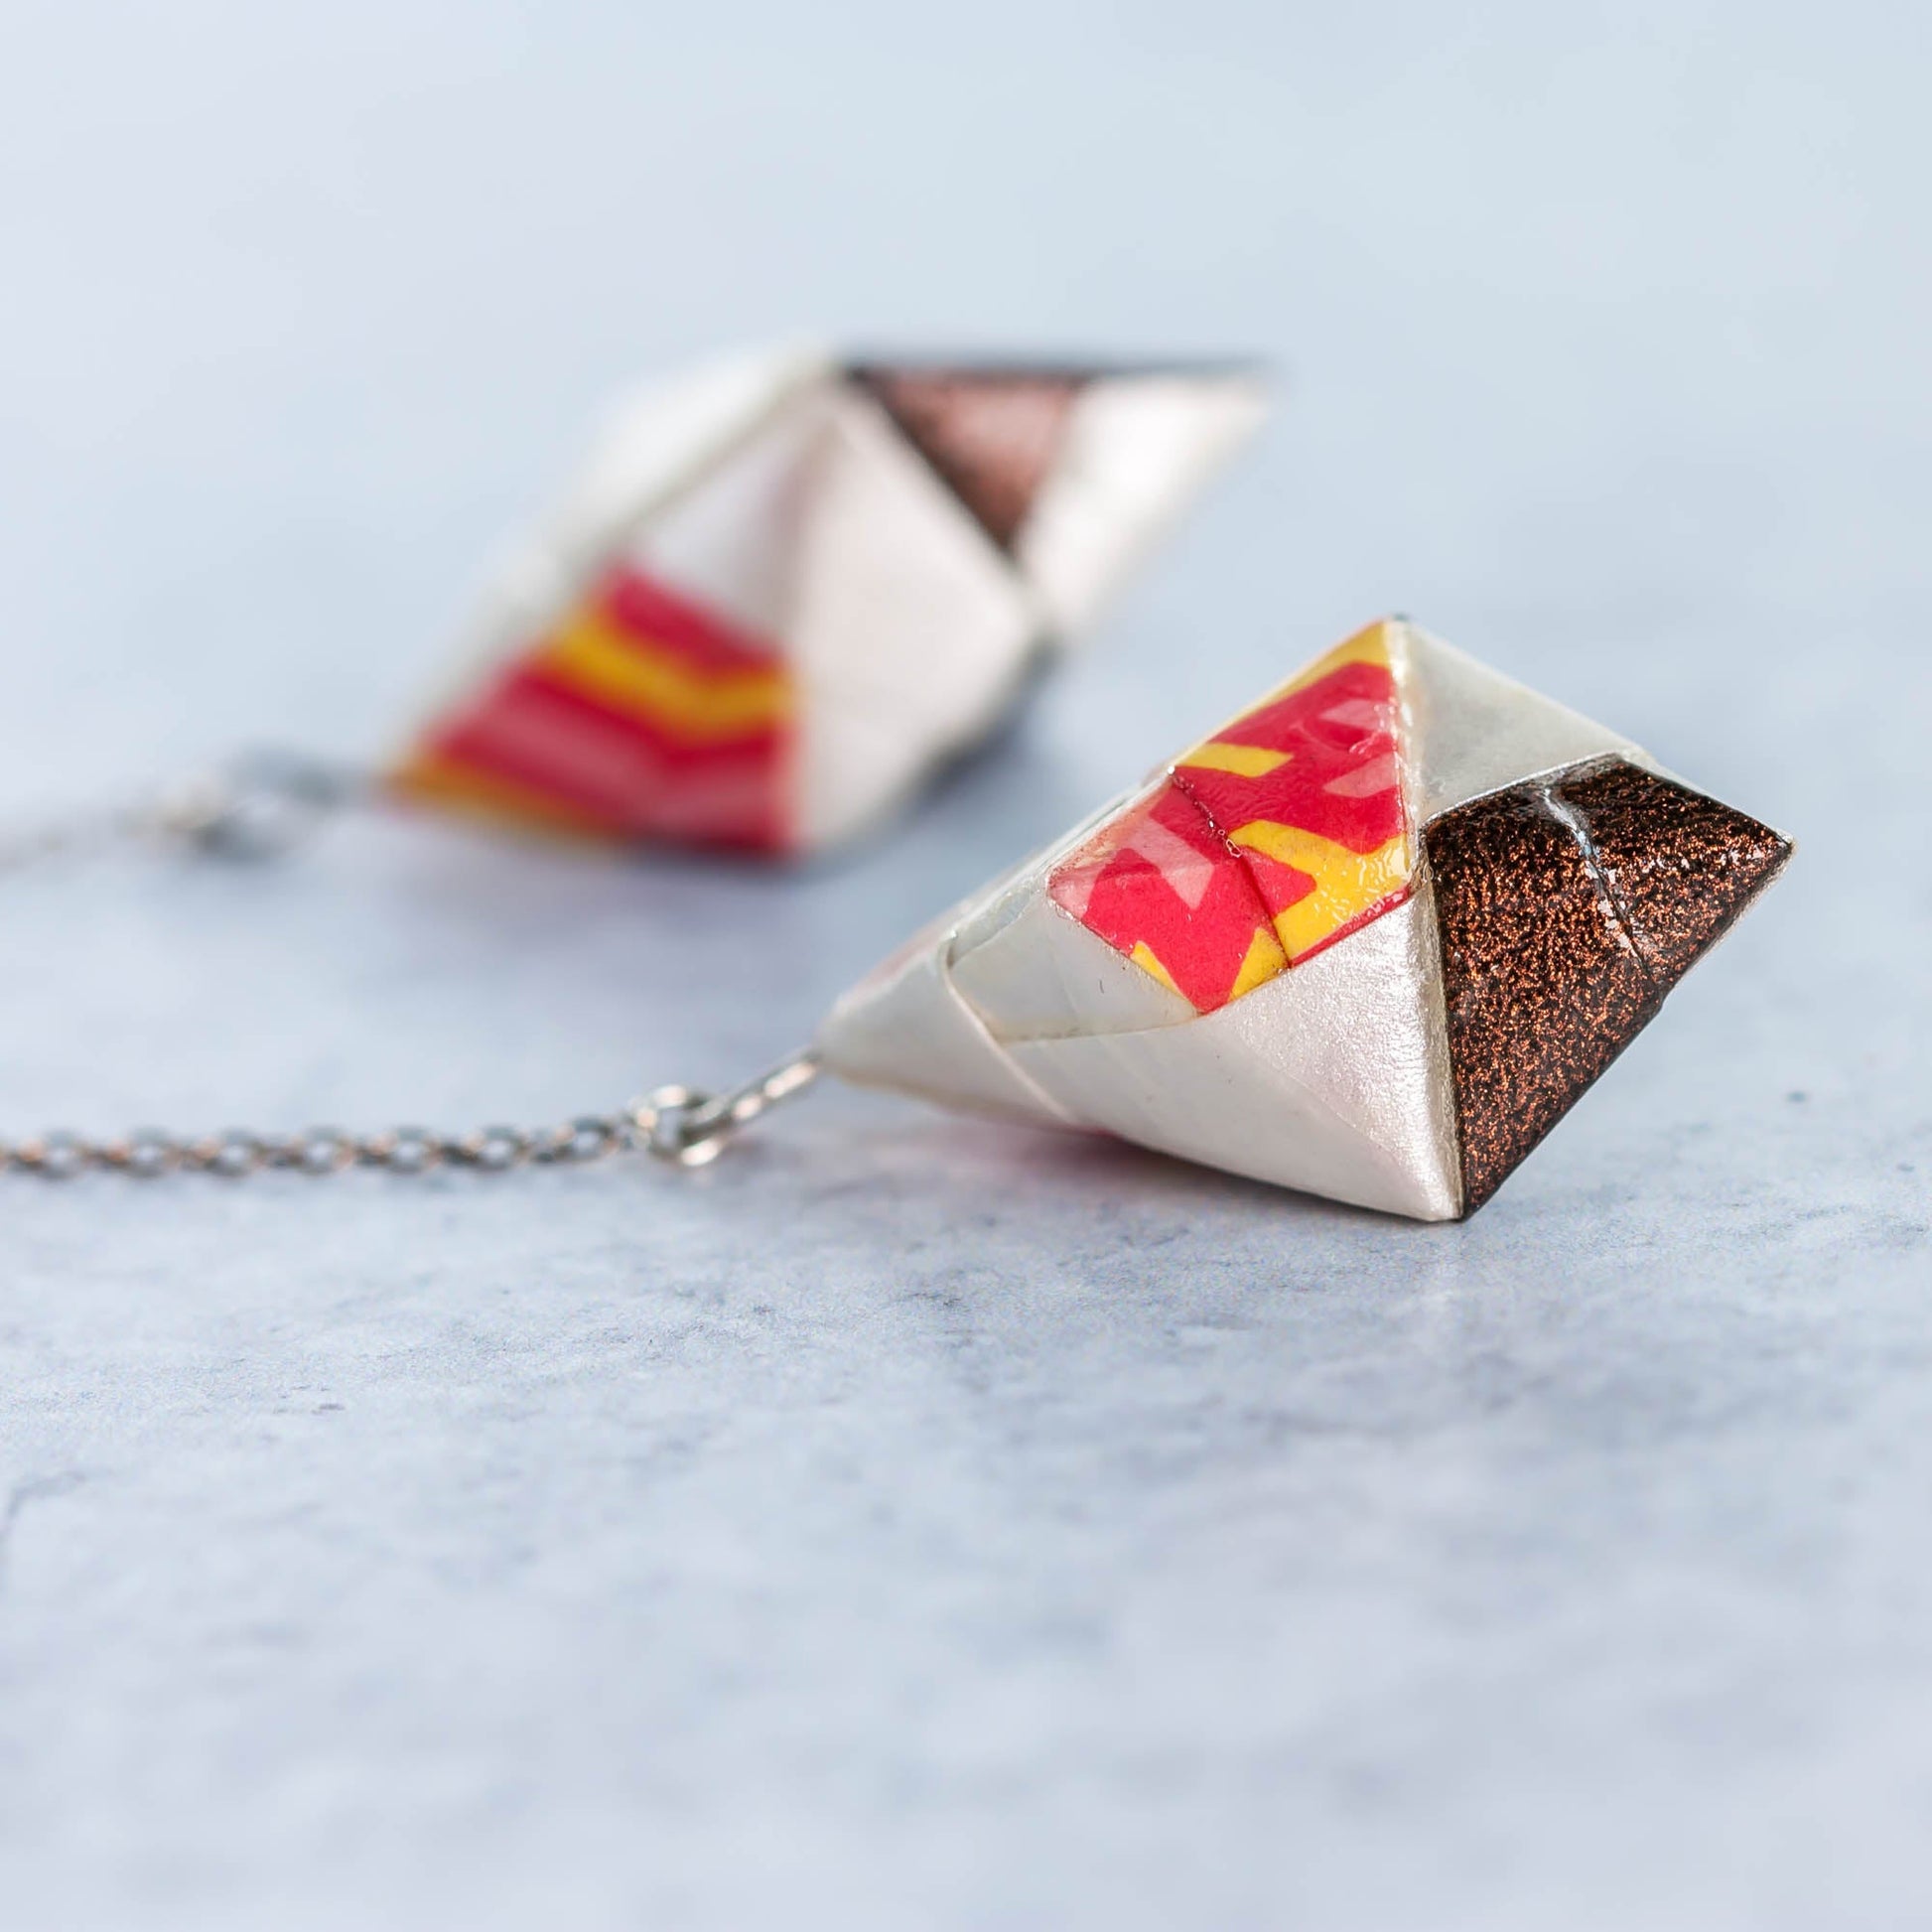 Origami Diamond Paper Earrings - Copper Pink Yellow White - By LeeMo Designs in Bend, Oregon